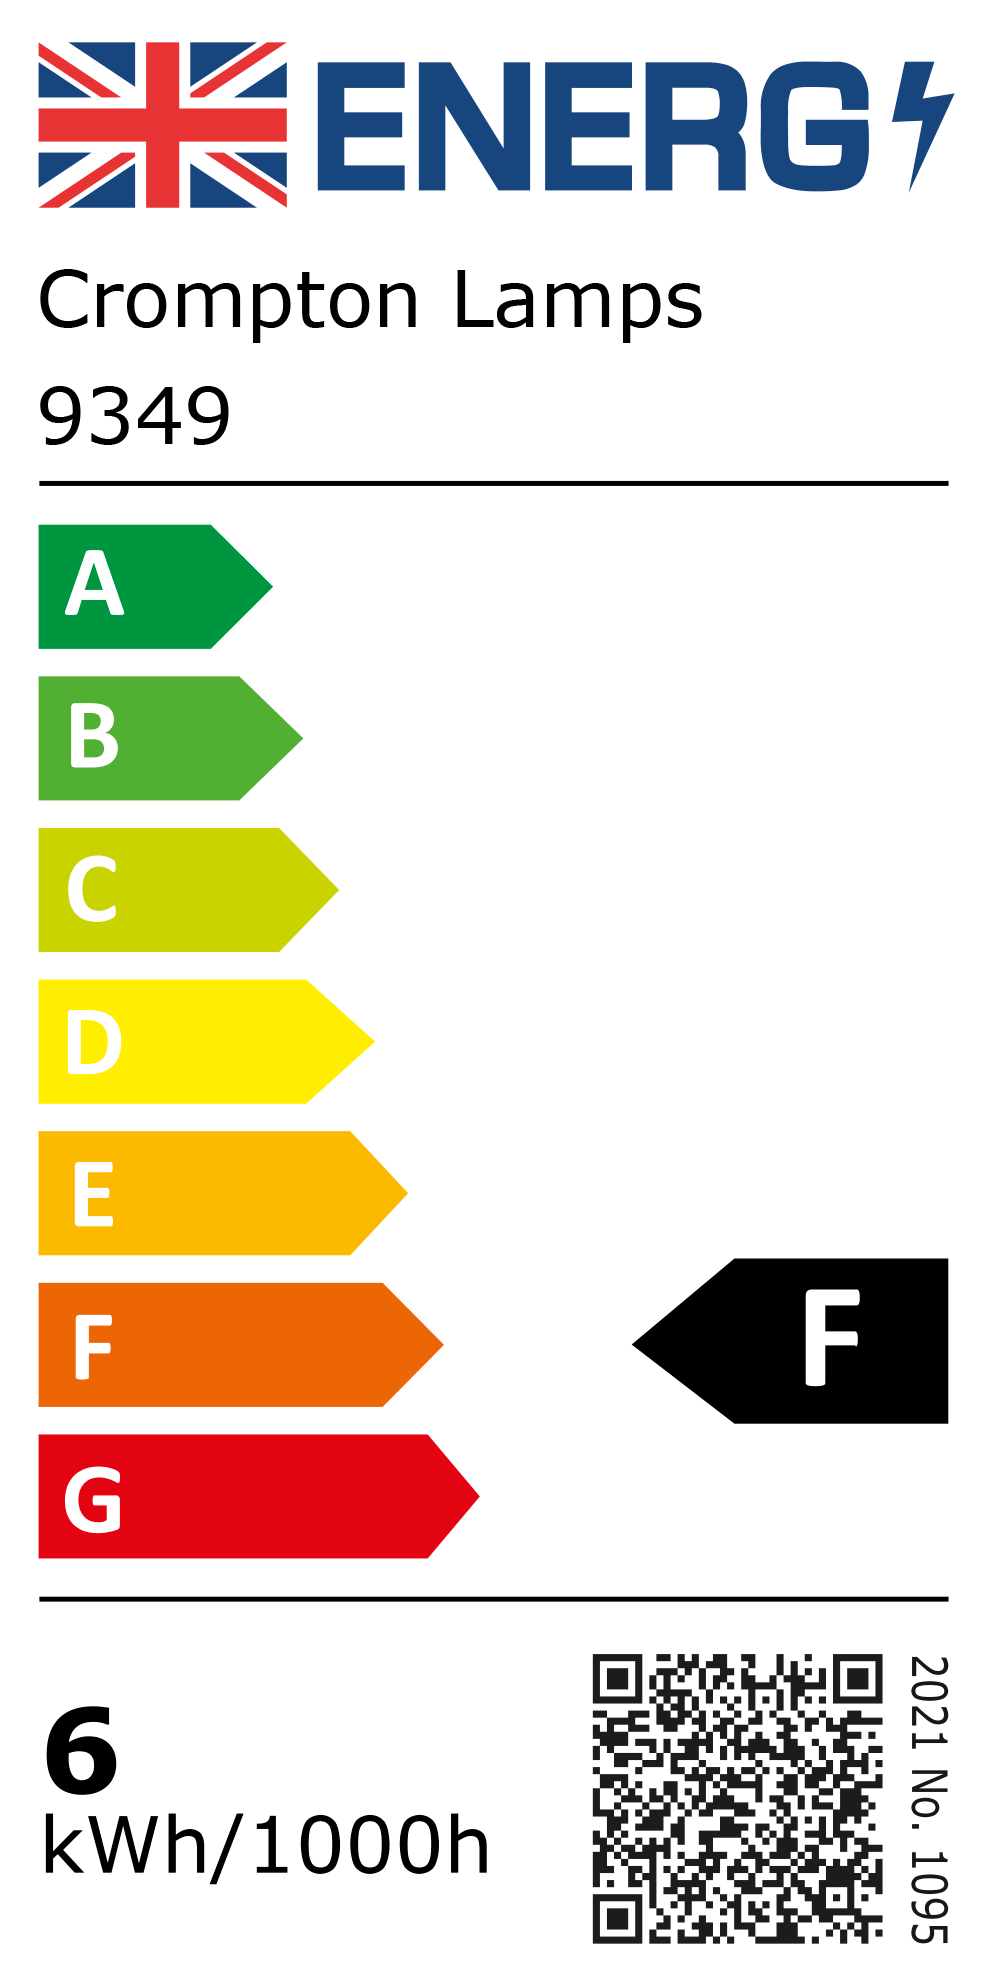 New 2021 Energy Rating Label: Stock Code 9349